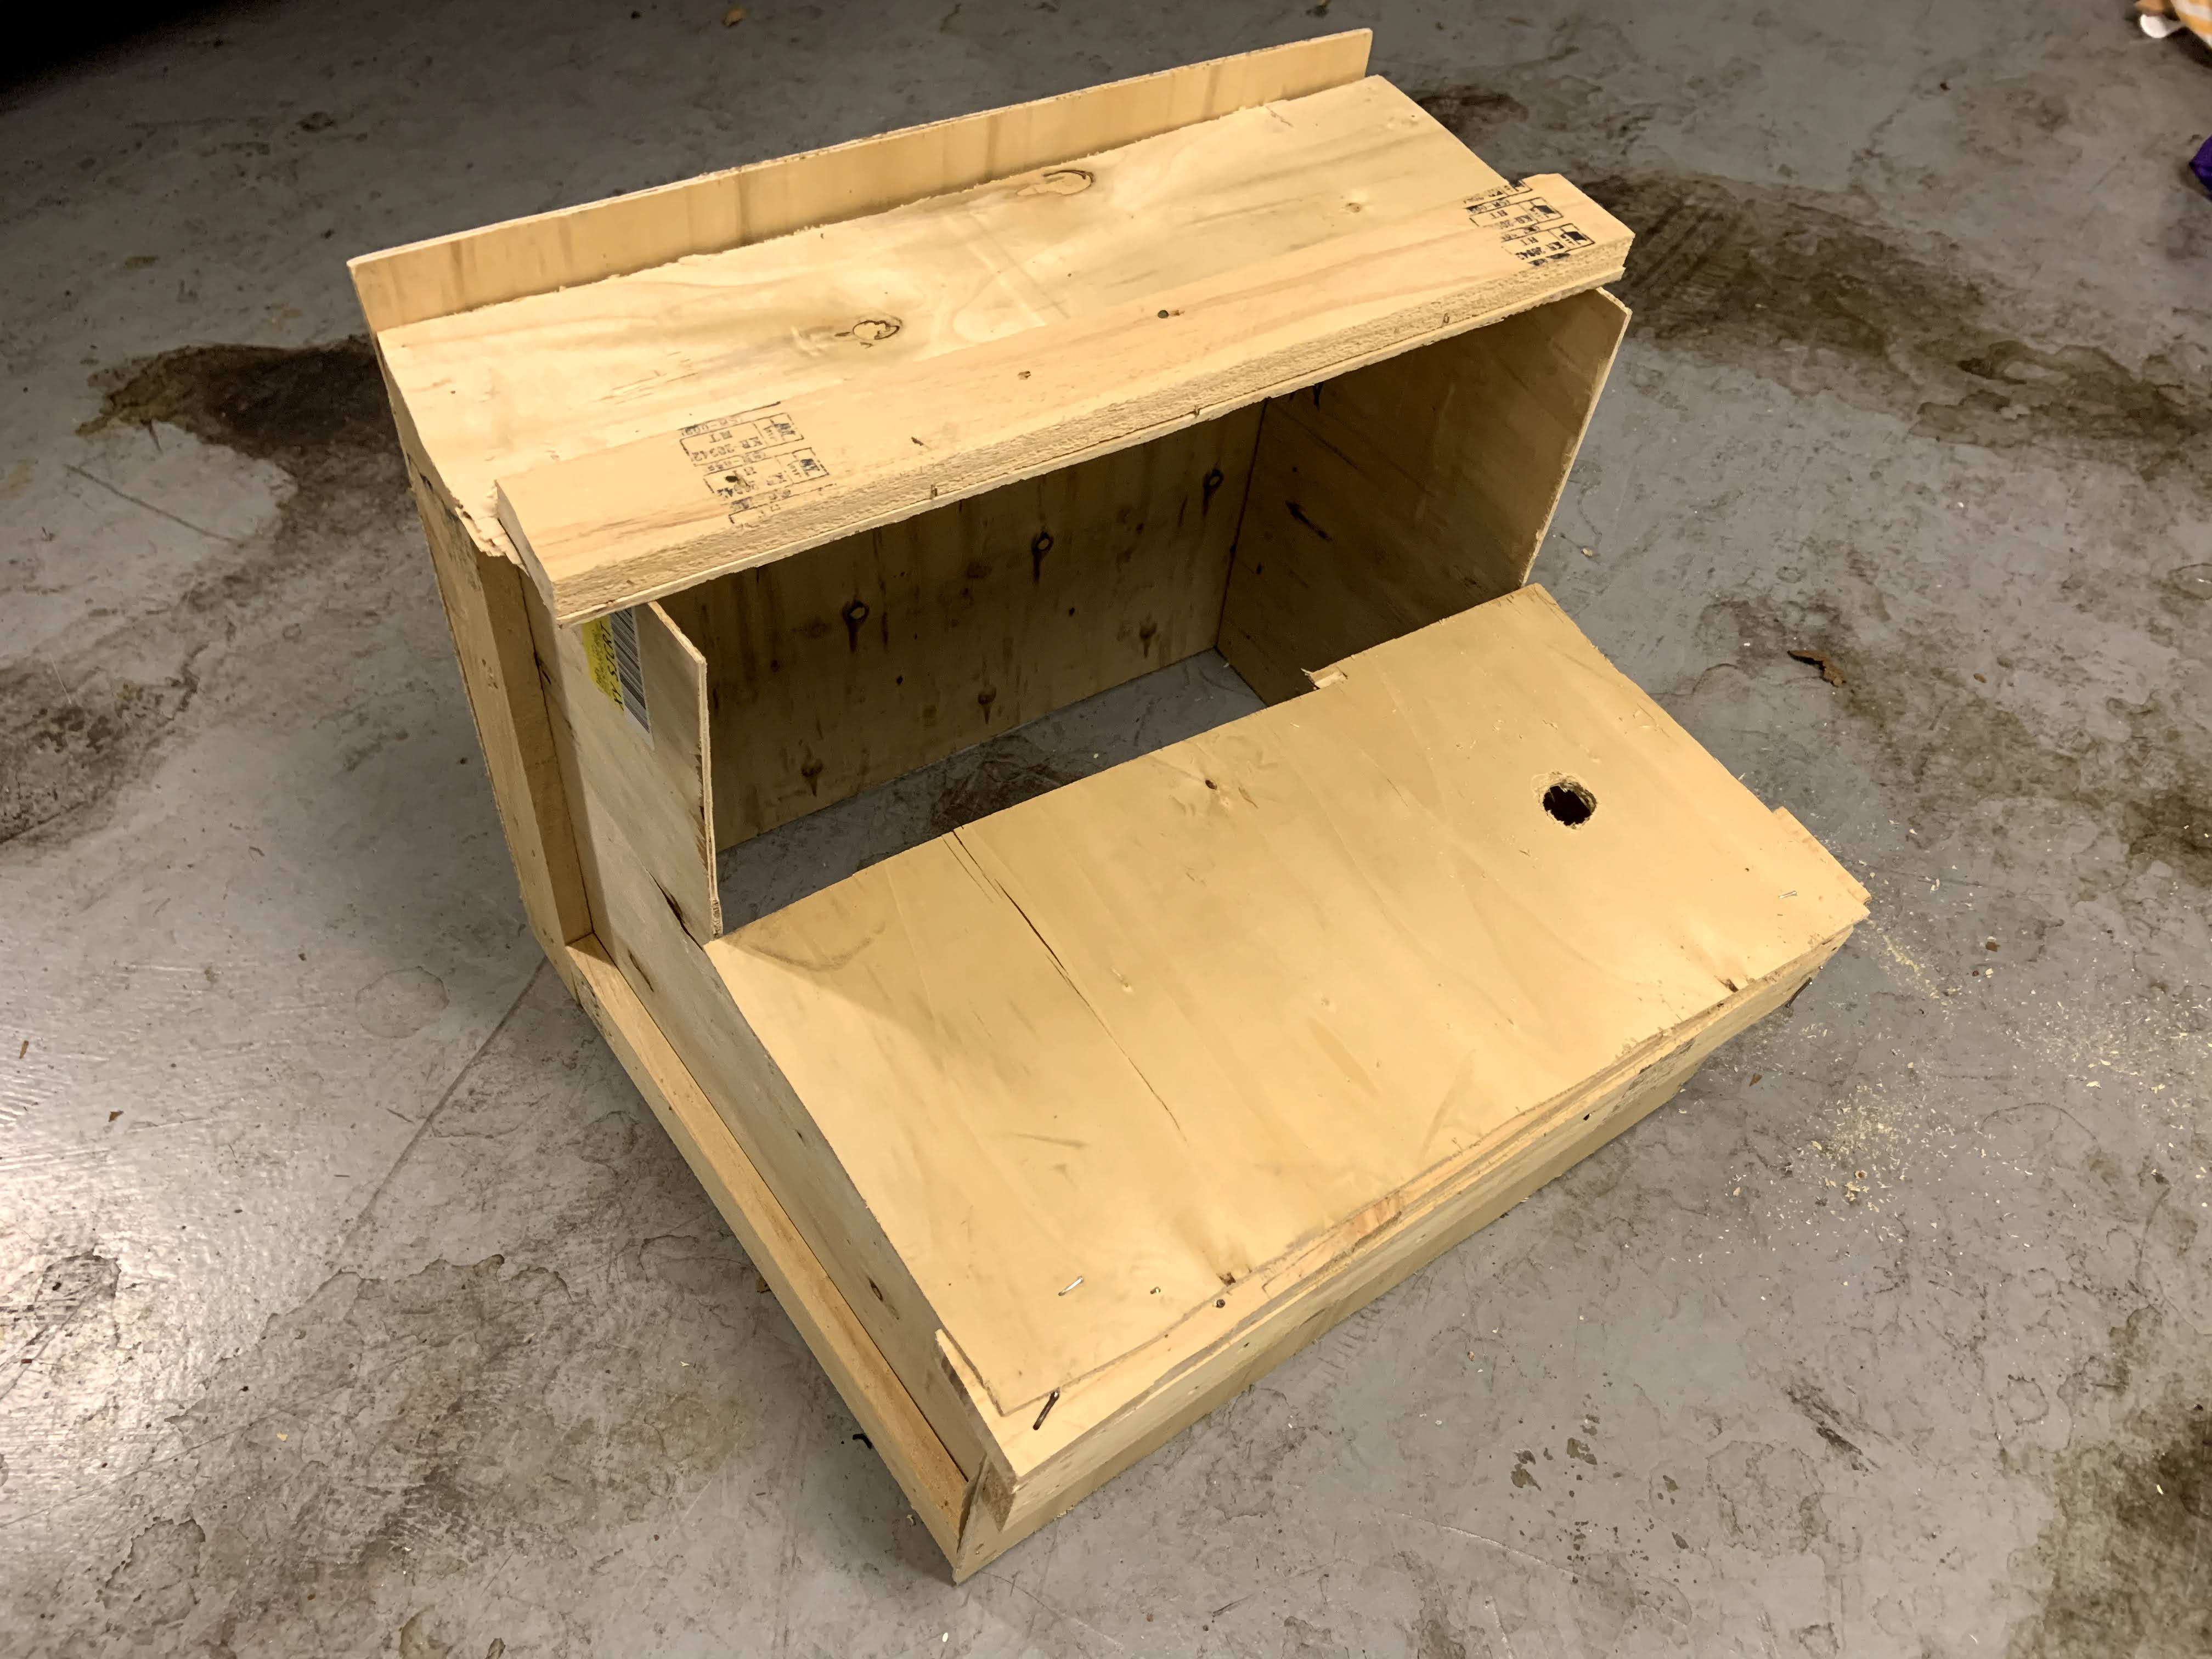 constructed box